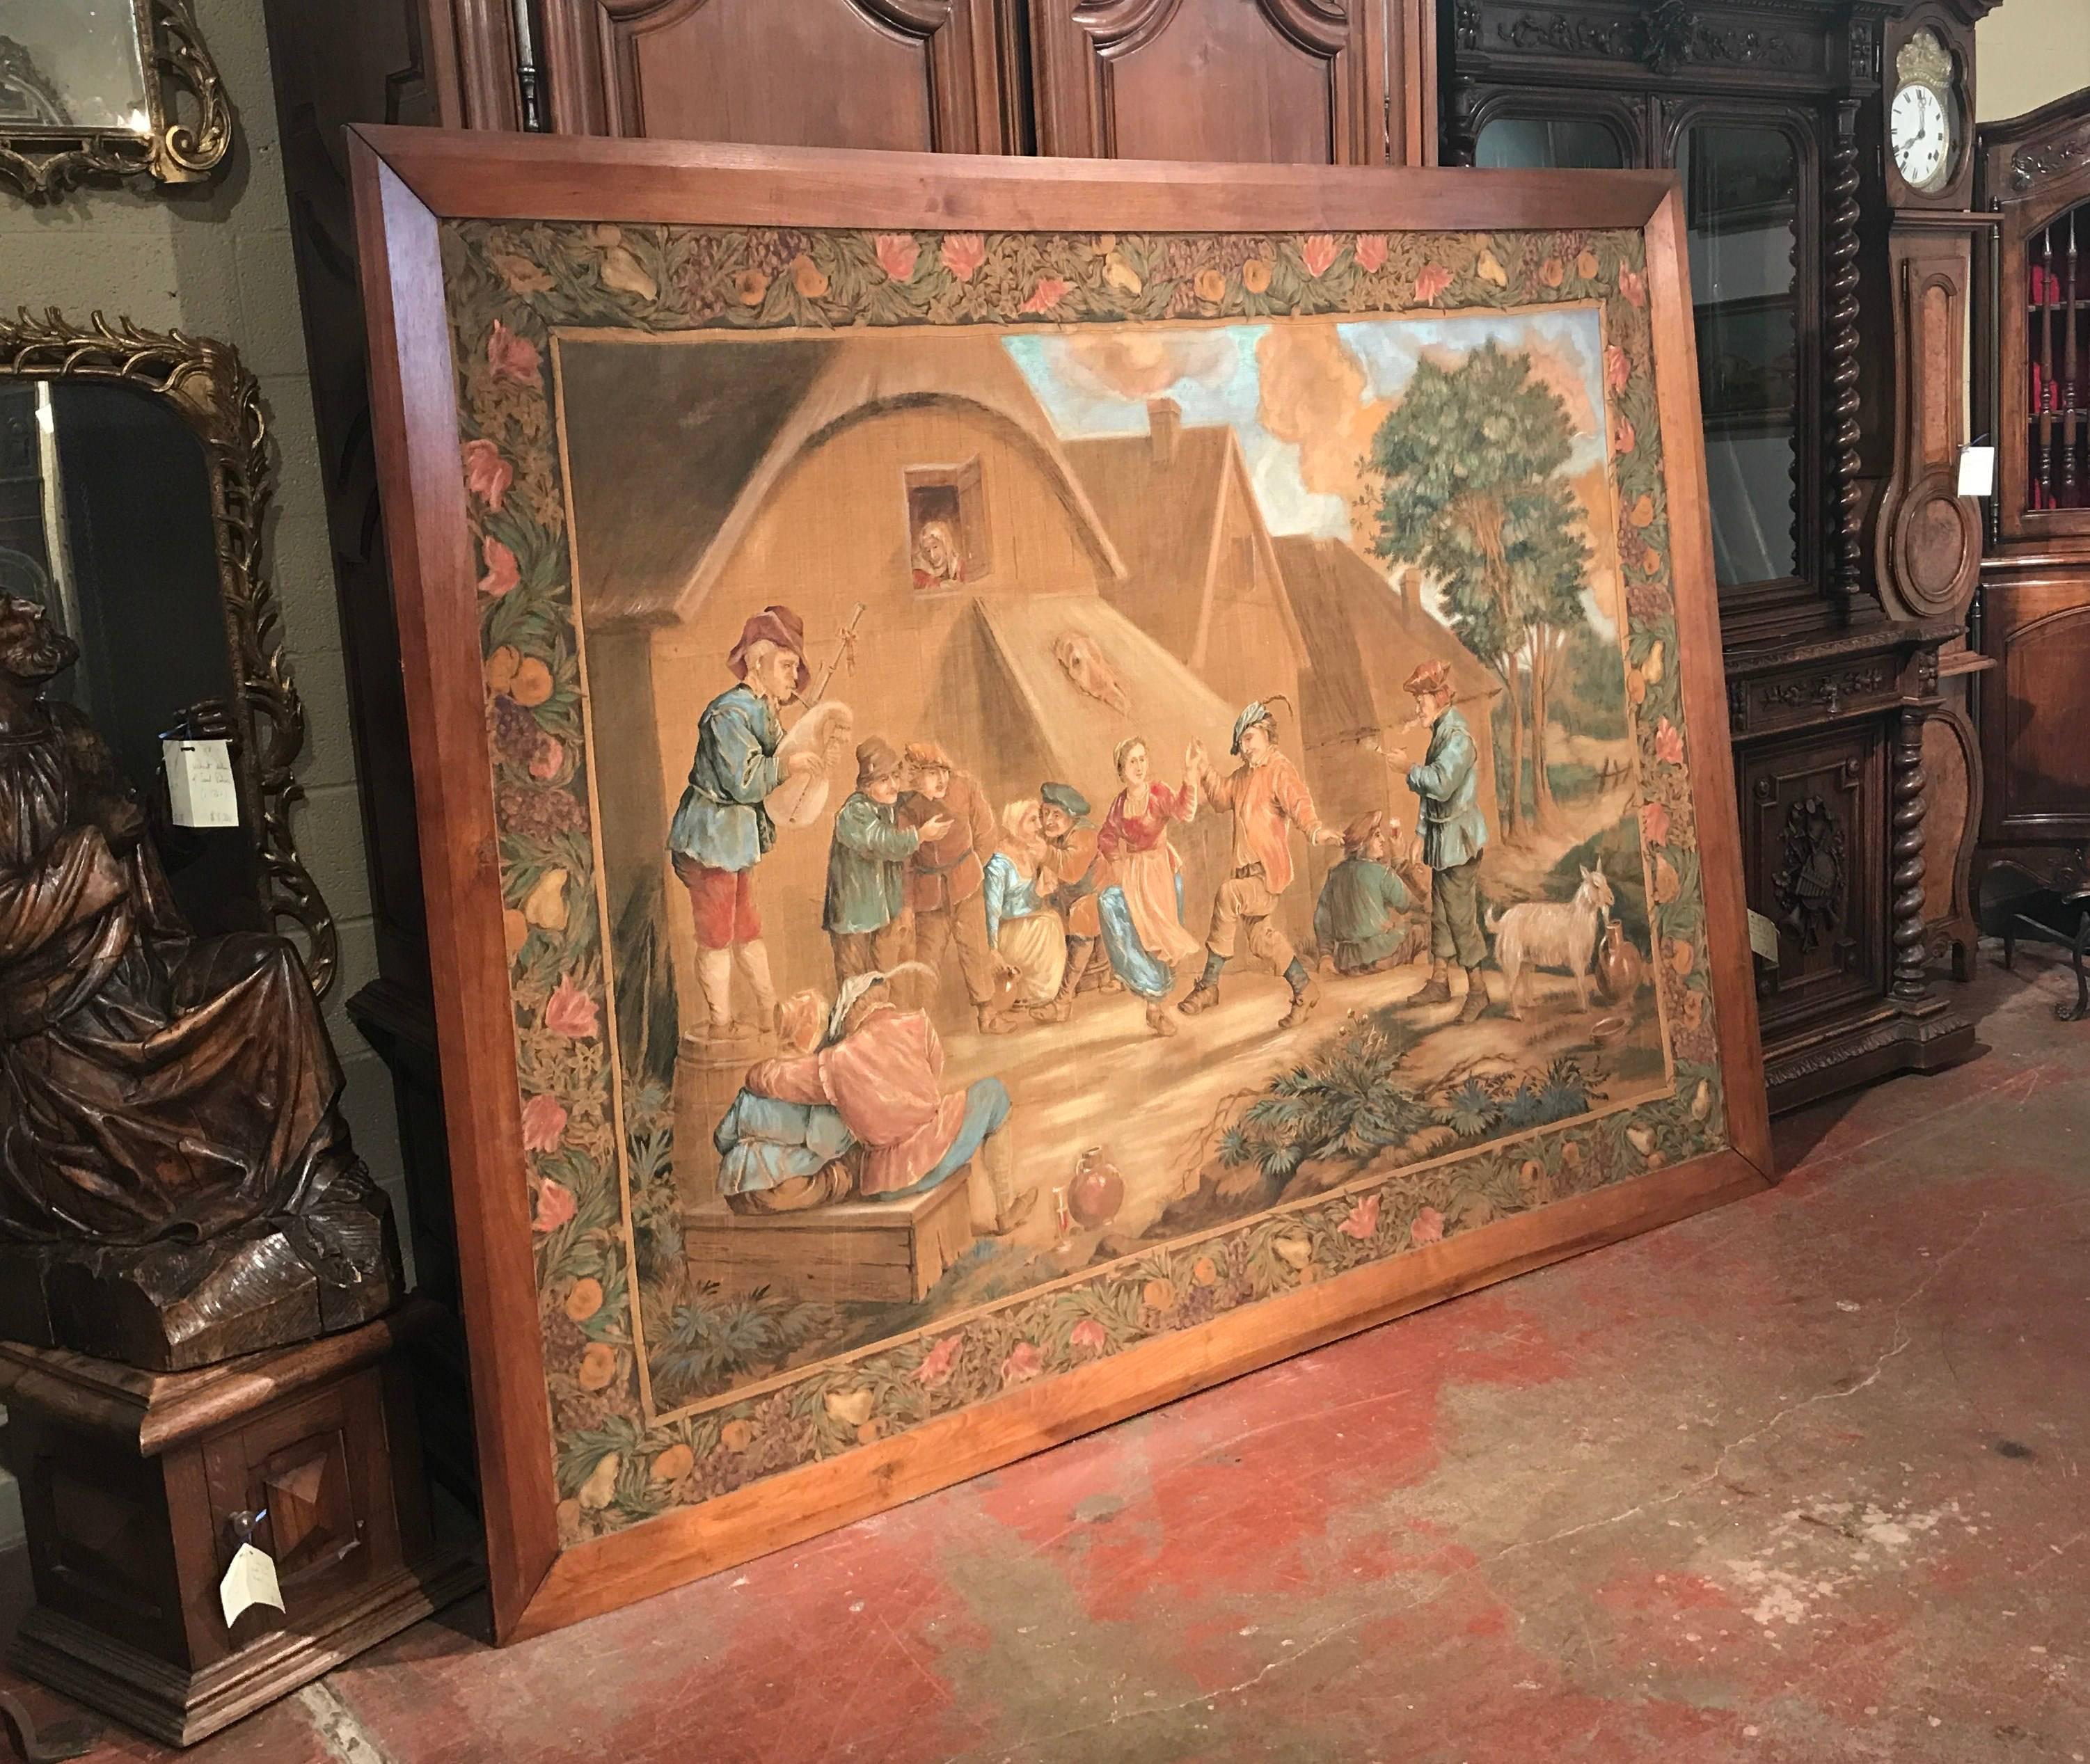 Decorate your game room or hallway with this colorful antique canvas from northern France. Created, circa 1870, the wall hanging painting depicts a lively pastoral scene filled with people dancing, courting and drinking in the manner of David